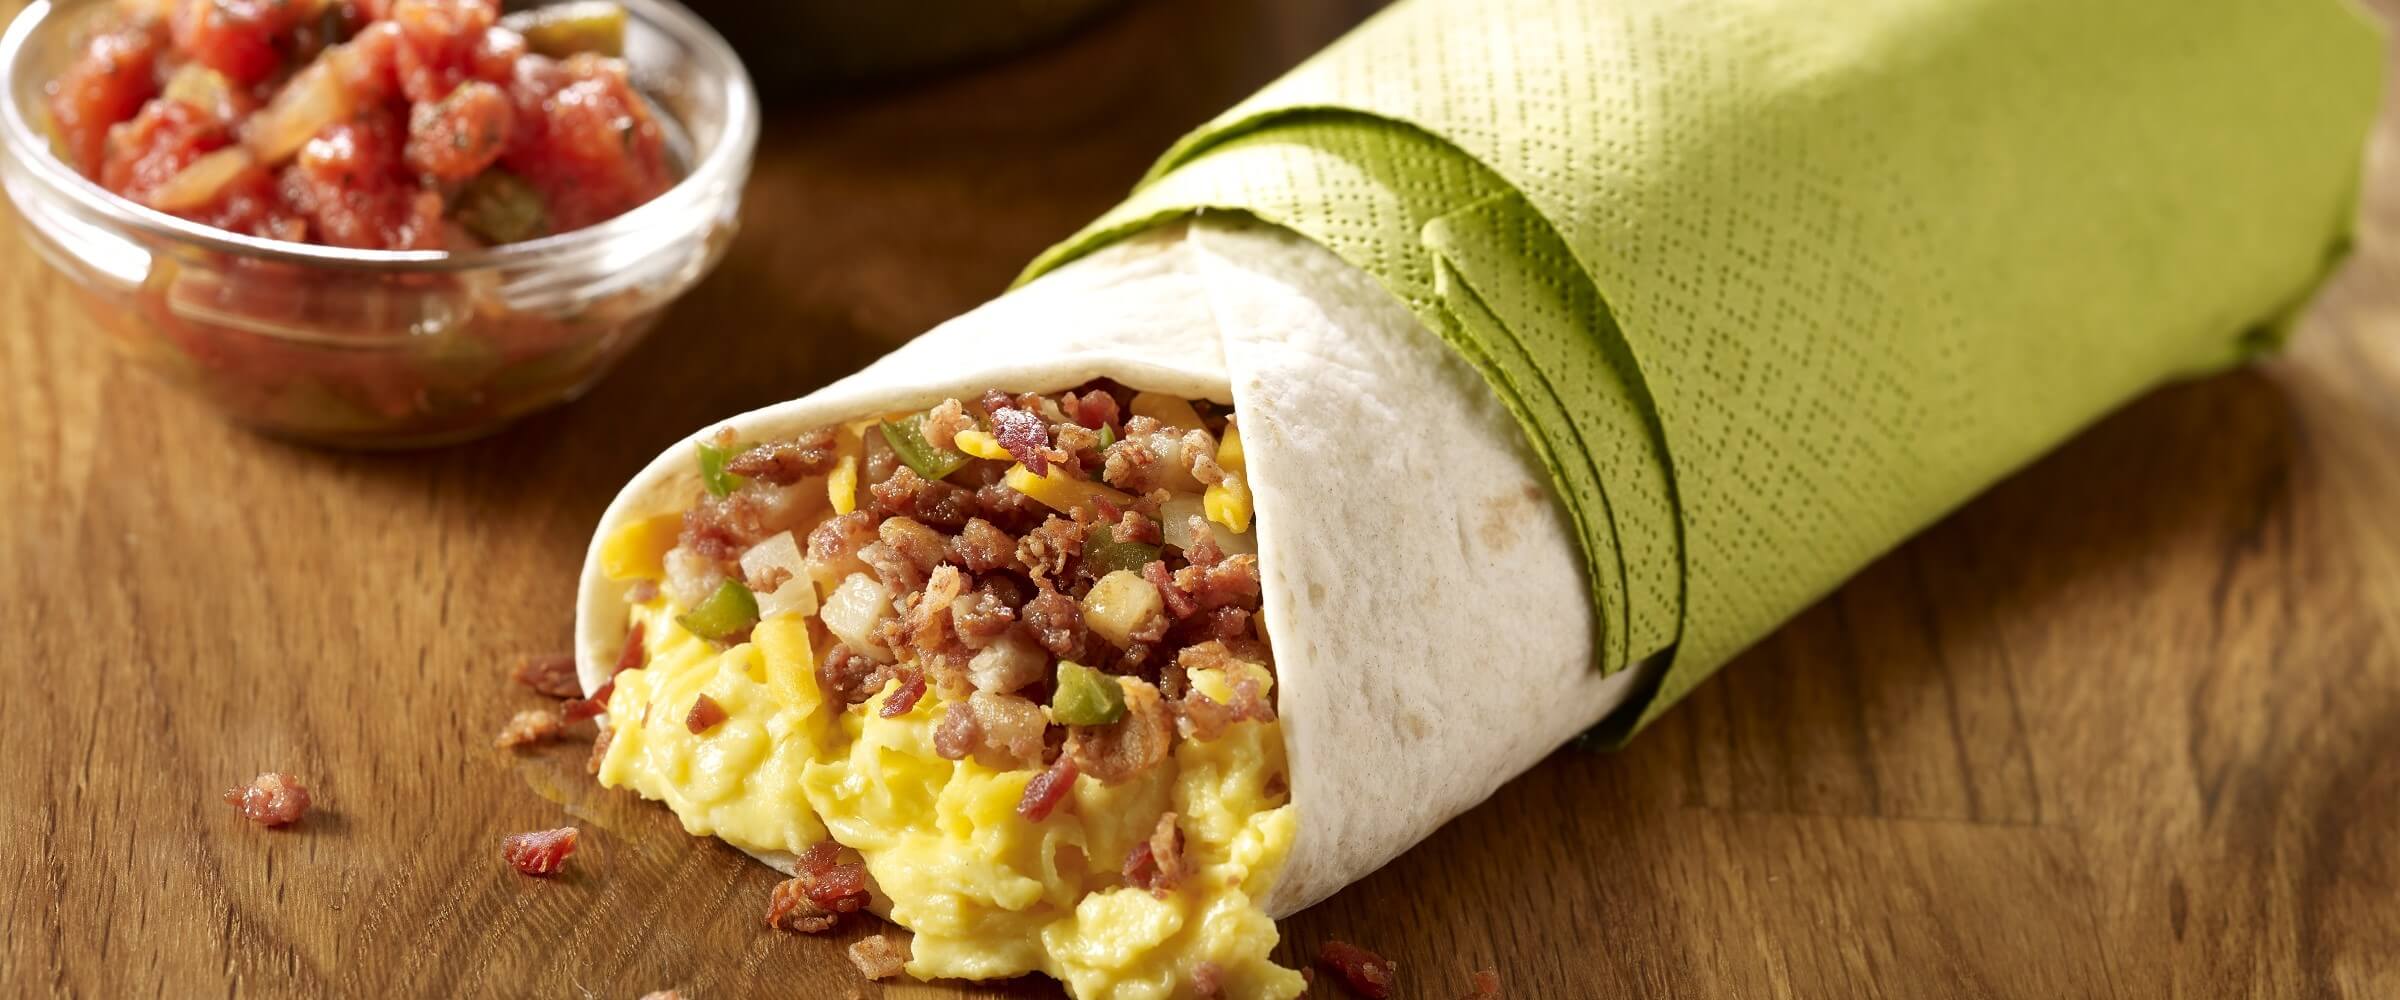 Corned beef hash egg burrito wrapped in green napkin with bowl of salsa